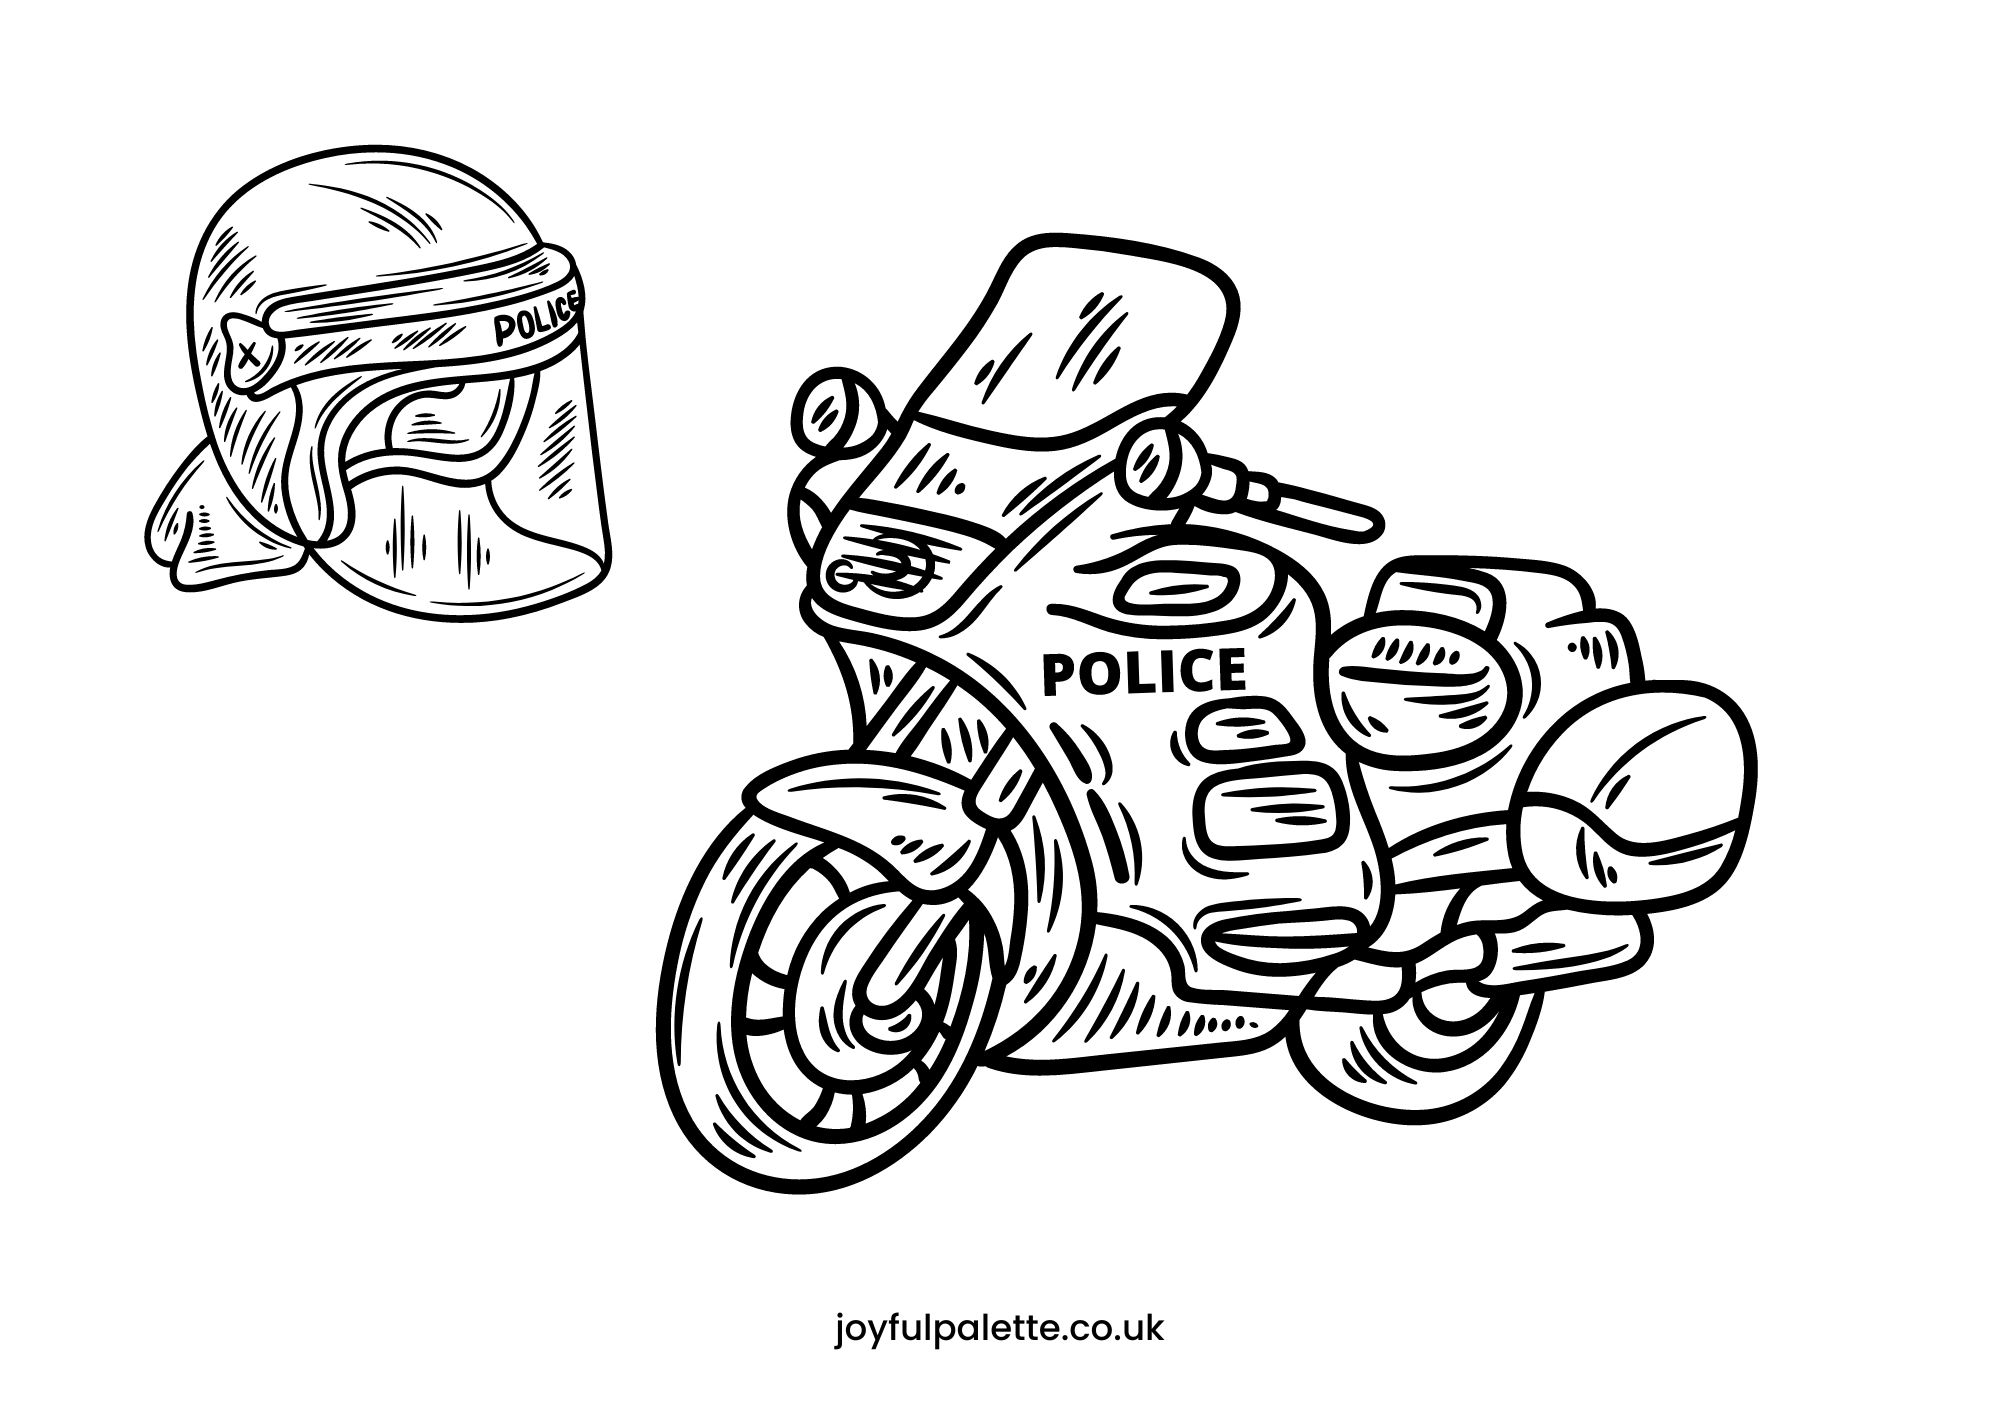 Police Motorcycle and Helmet Coloring Page